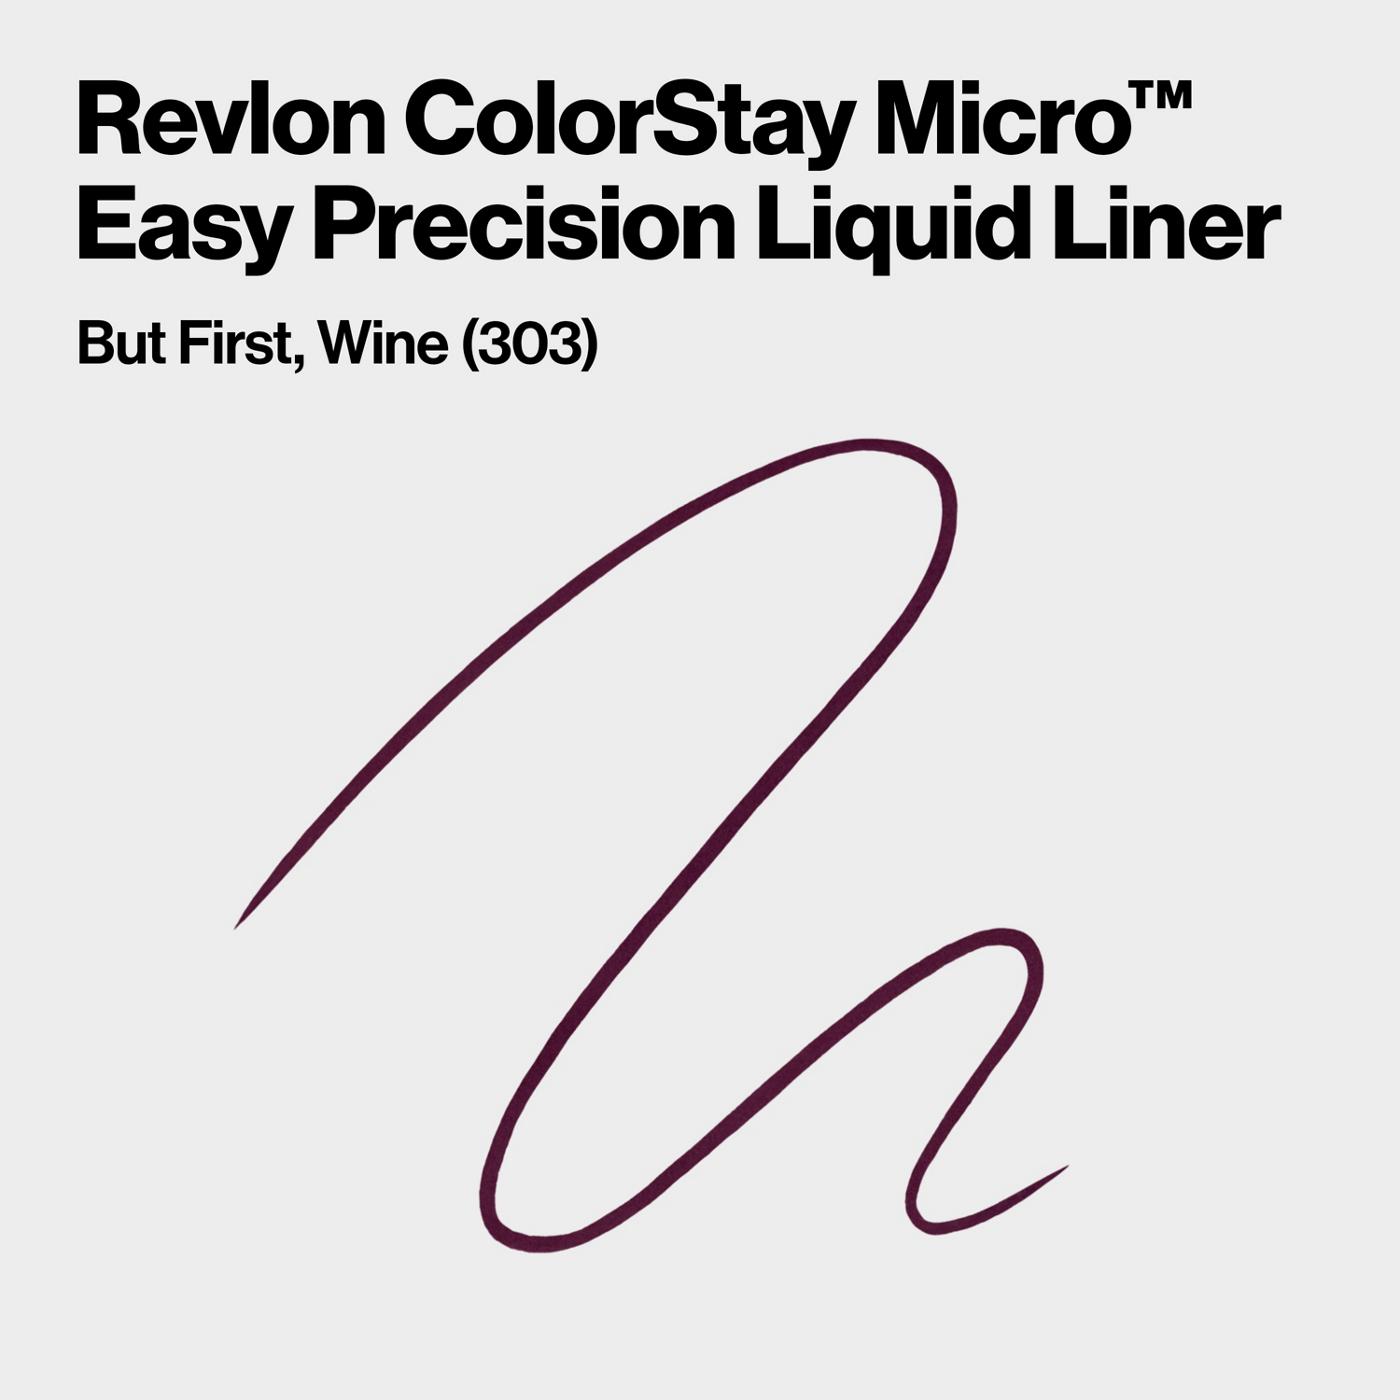 Revlon ColorStay Micro Liquid Liner - But First, Wine; image 2 of 9